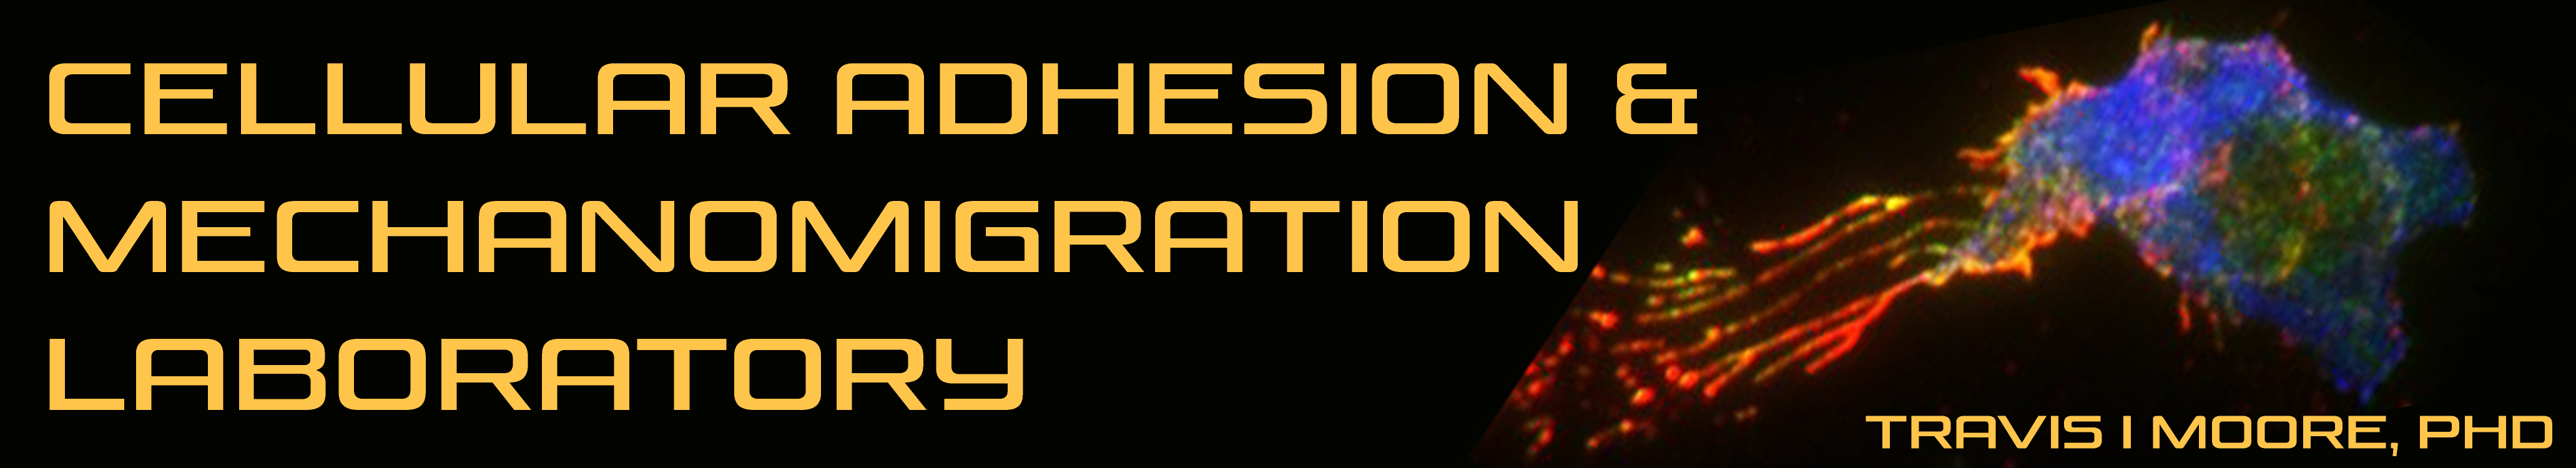 Cellular Adhesion and Mechanomigration Laboratory Banner